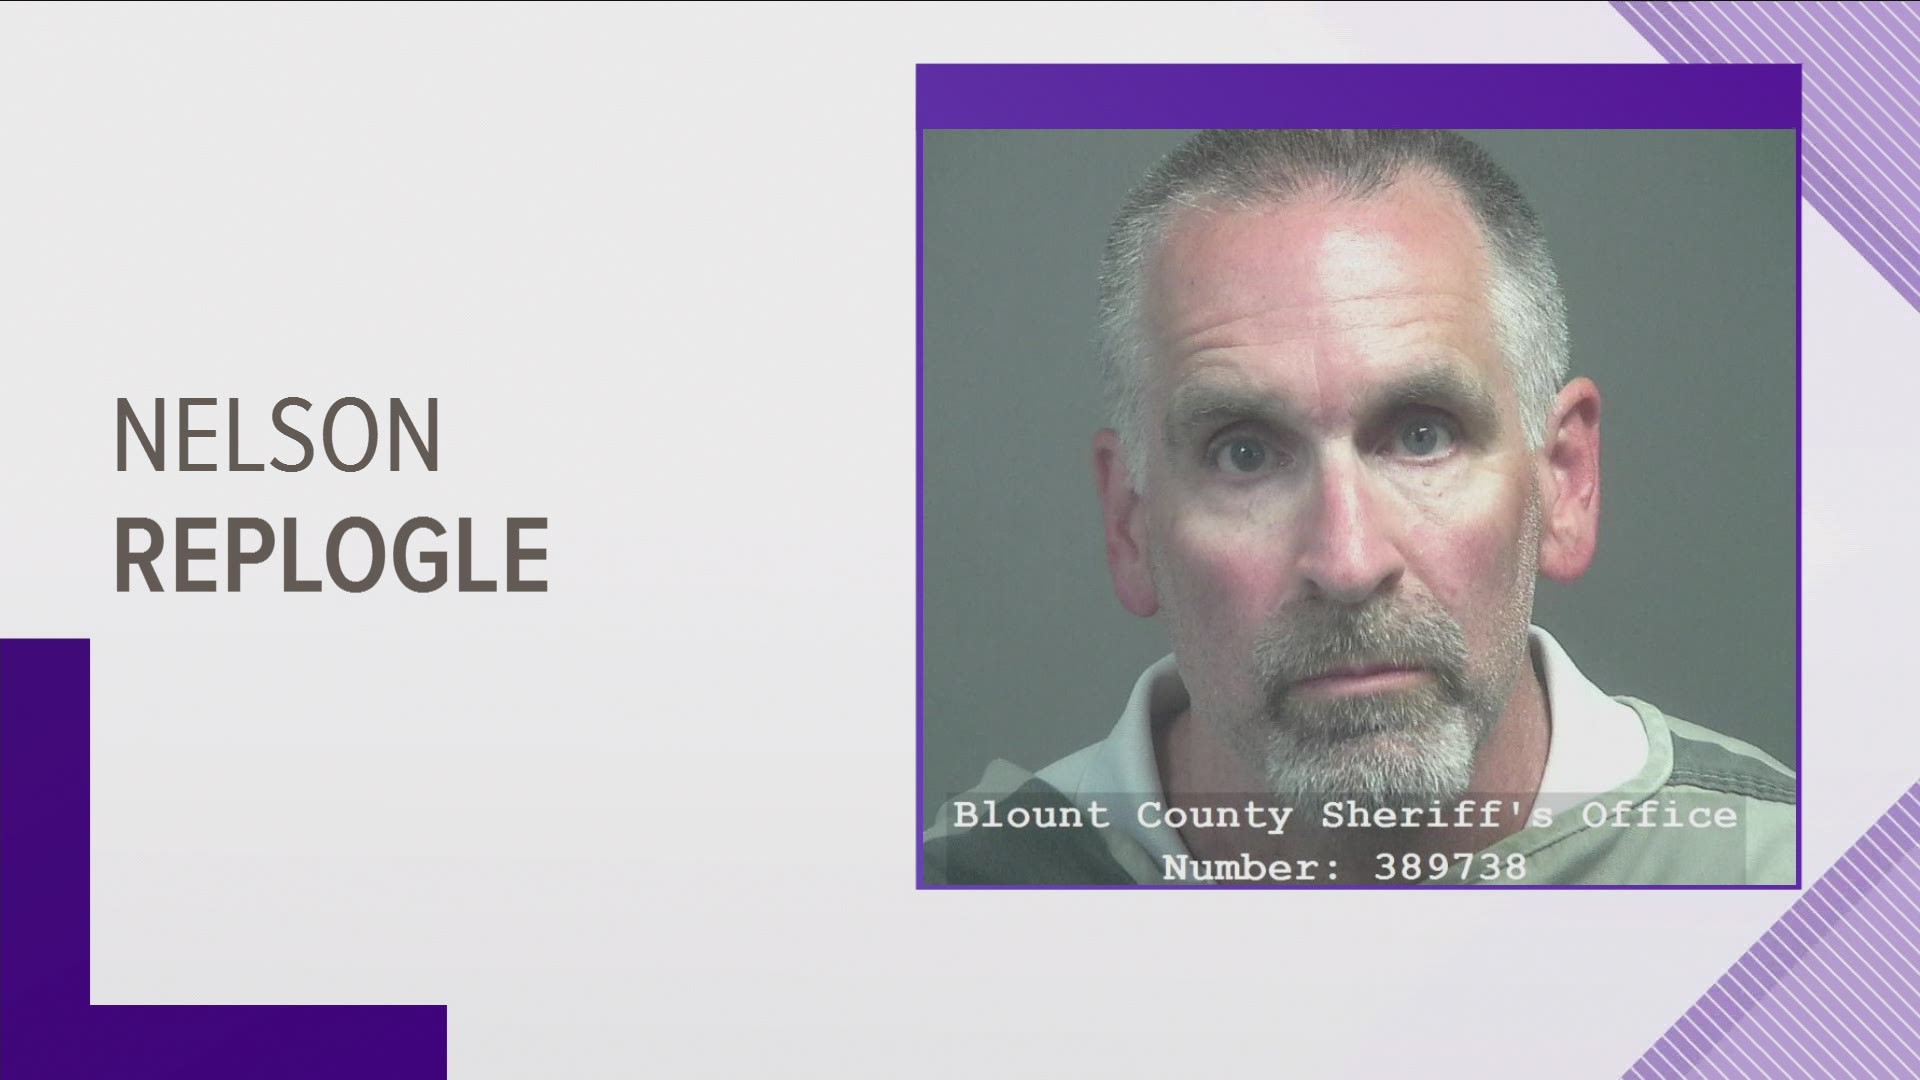 A Knoxville man is accused of using Bitcoin to try hiring someone to kill his wife.